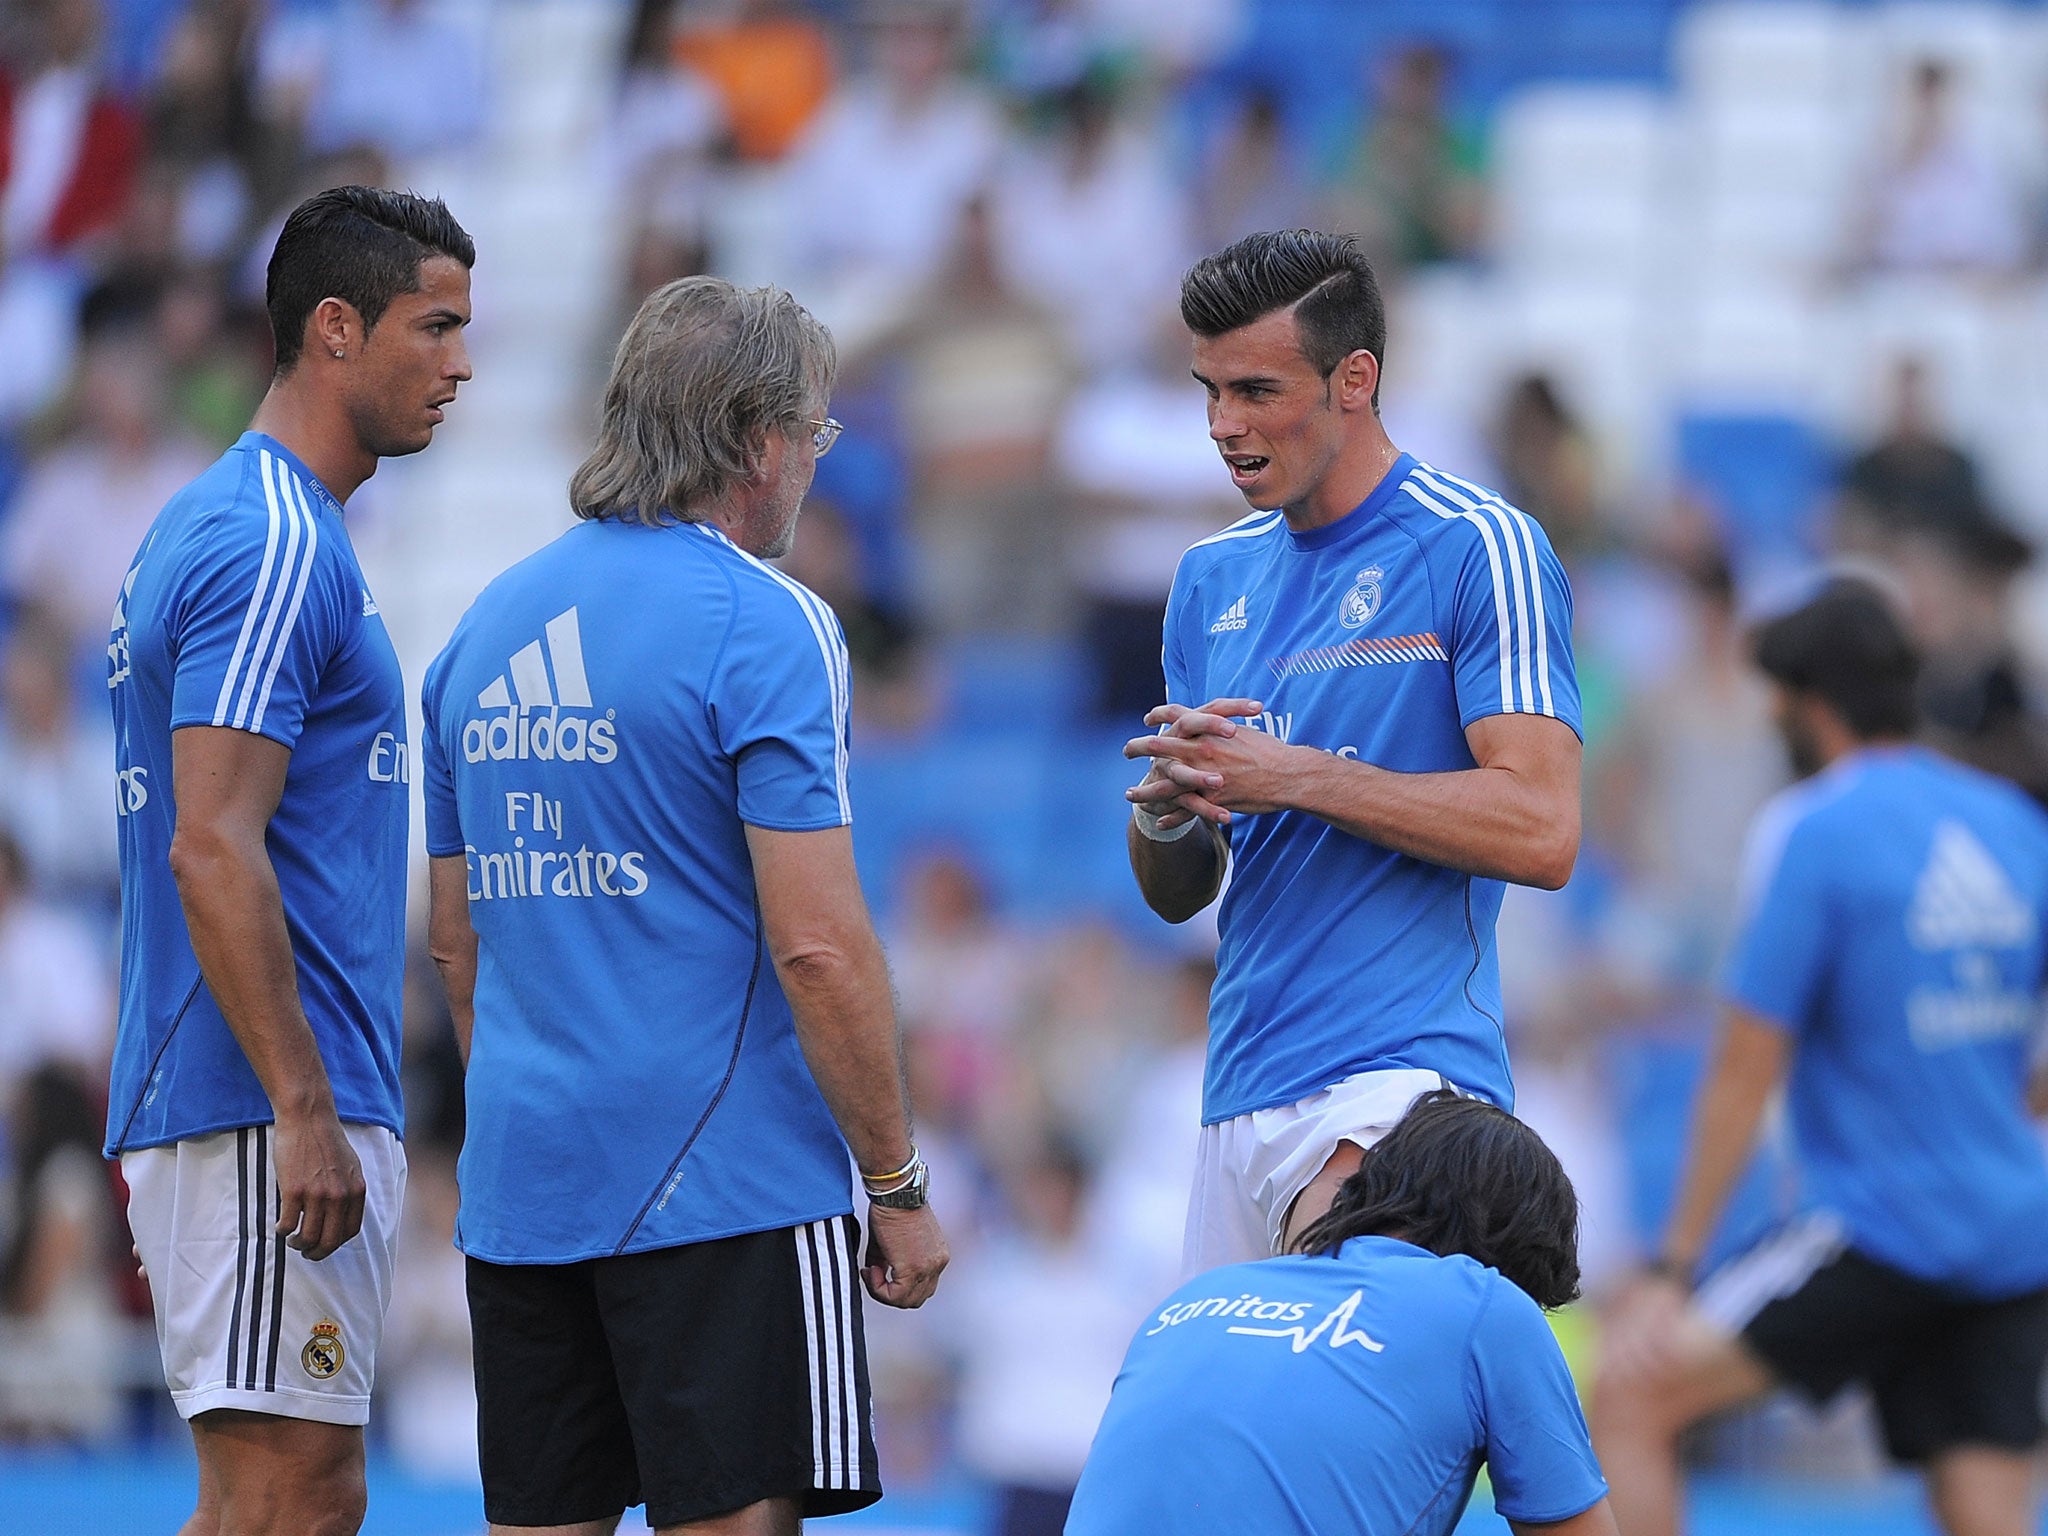 Gareth Bale picked up the injury in the warm-up ahead of the Getafe match on Sunday